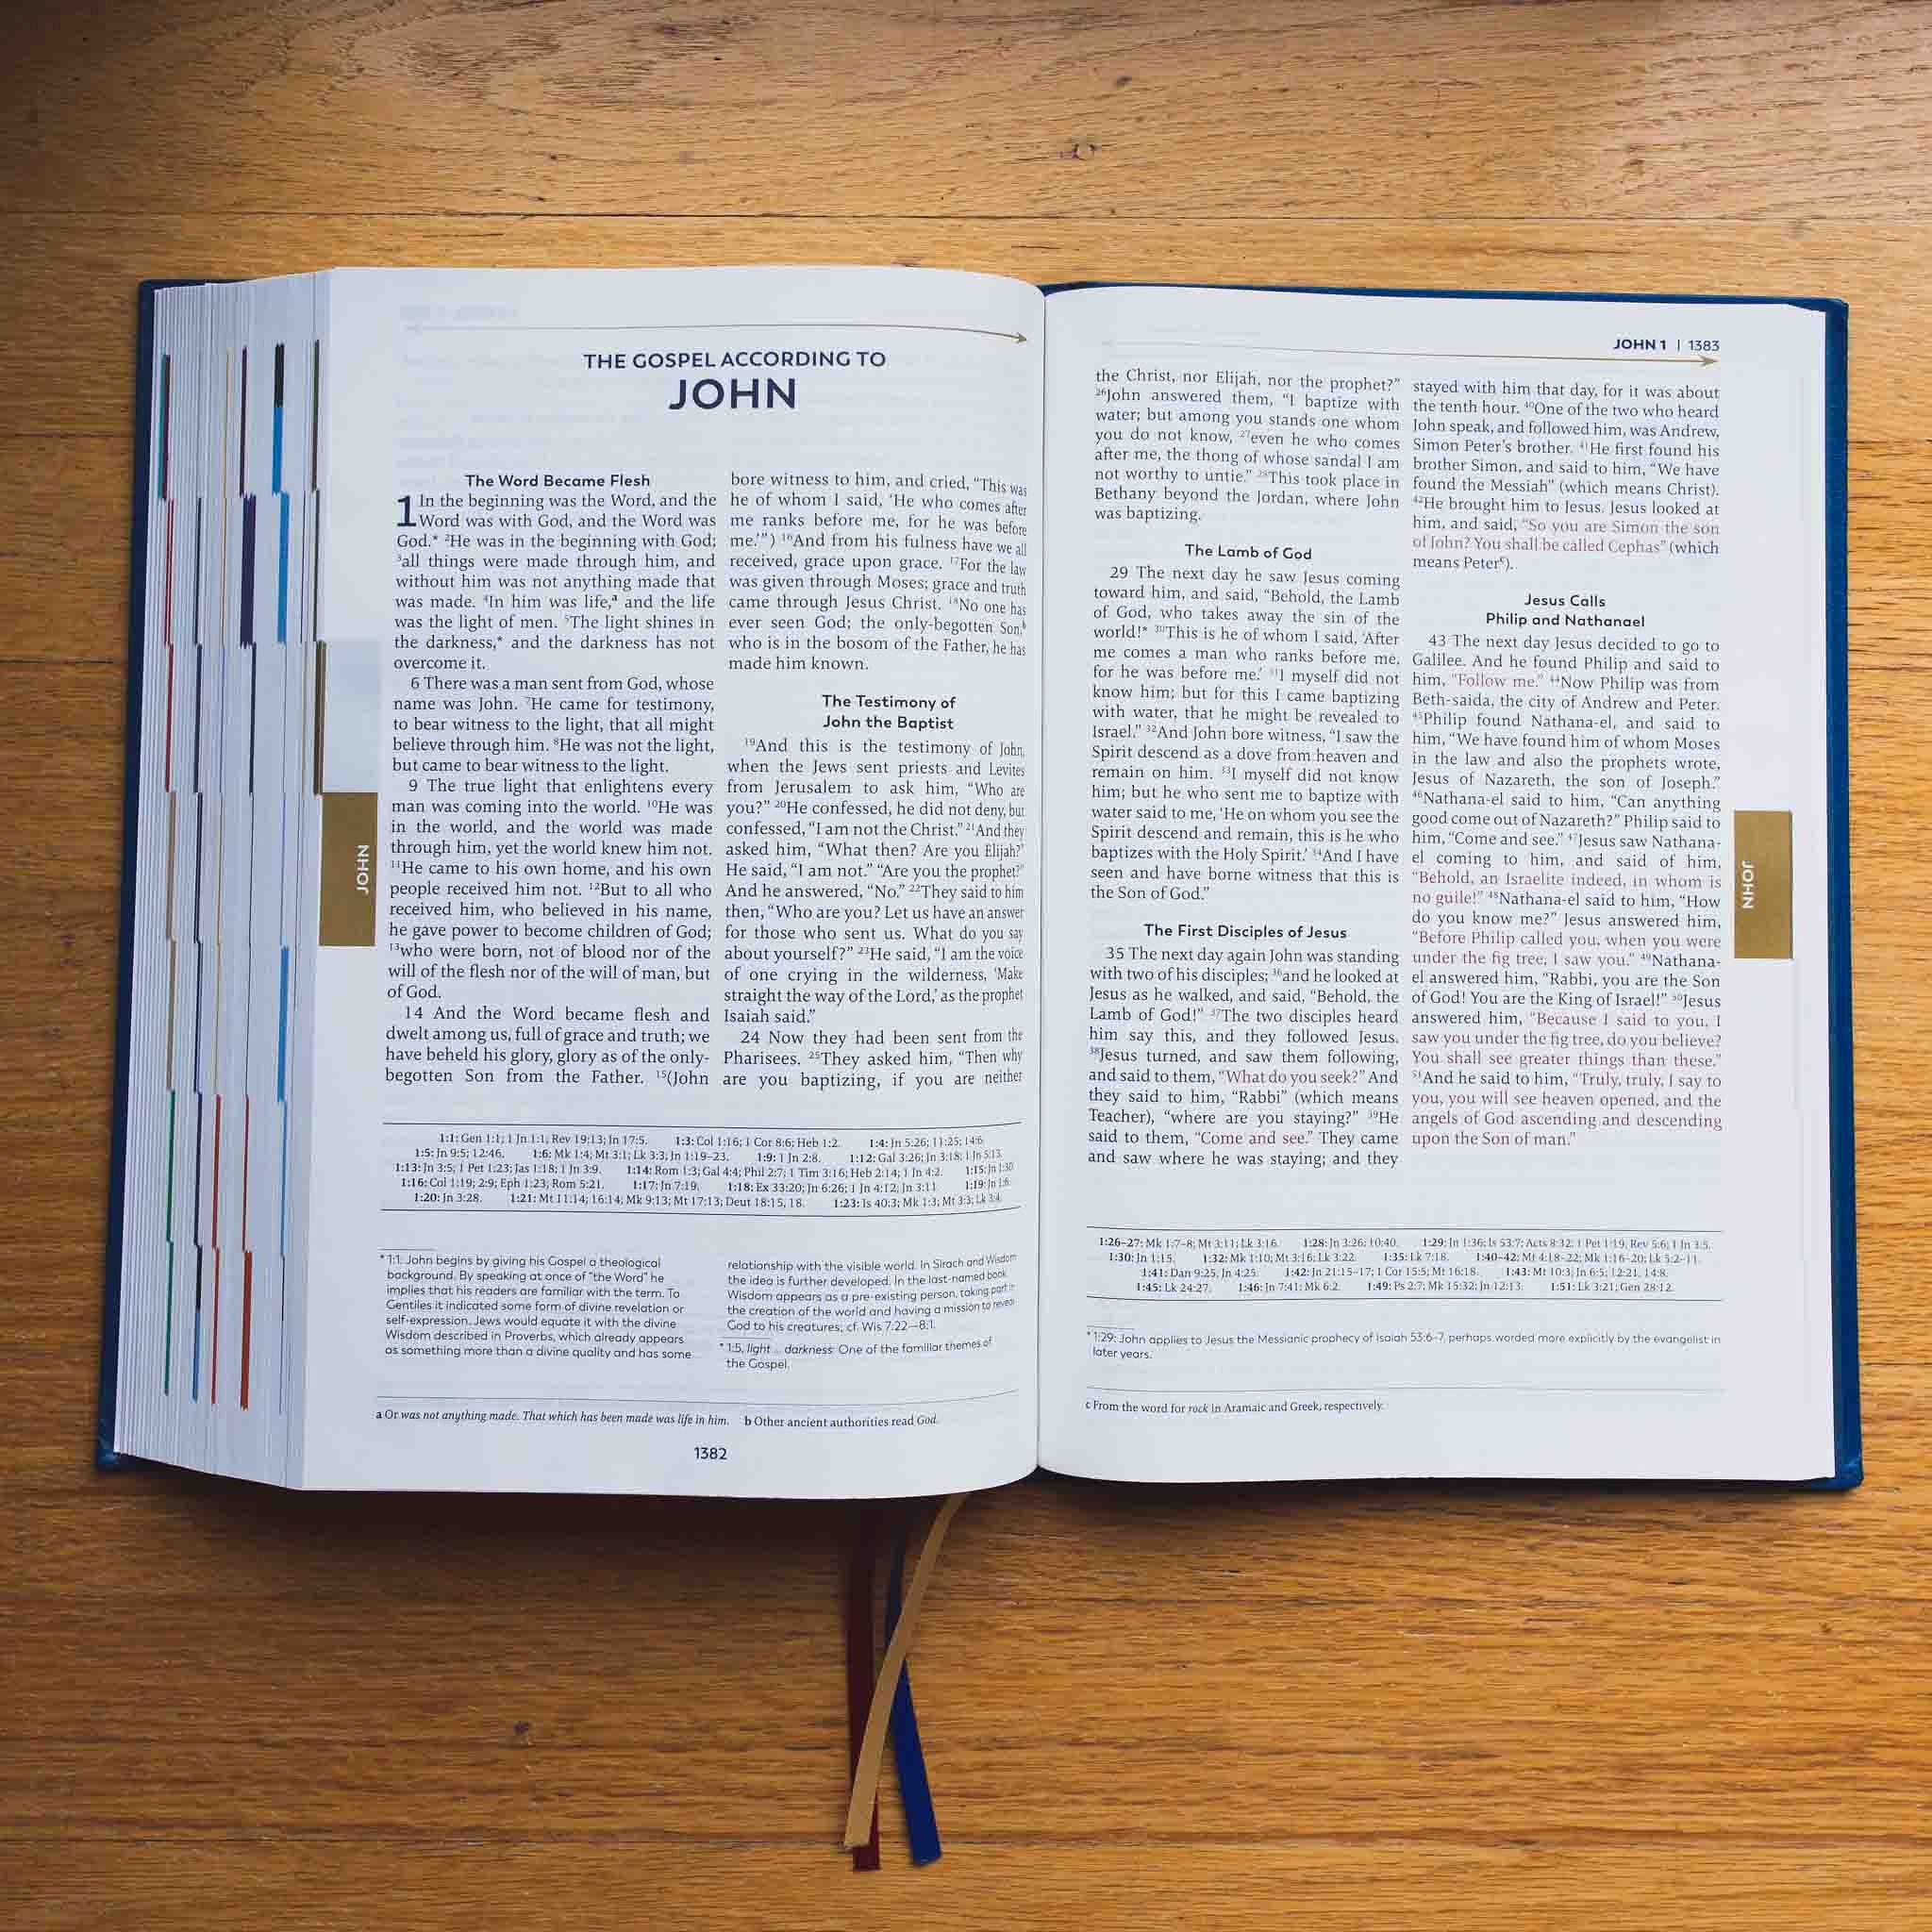 A sample page from John 6 of the Great Adventure Catholic Bible from Jeff Cavins and Ascension with a comparison between the original Bible and the Large Print Version.